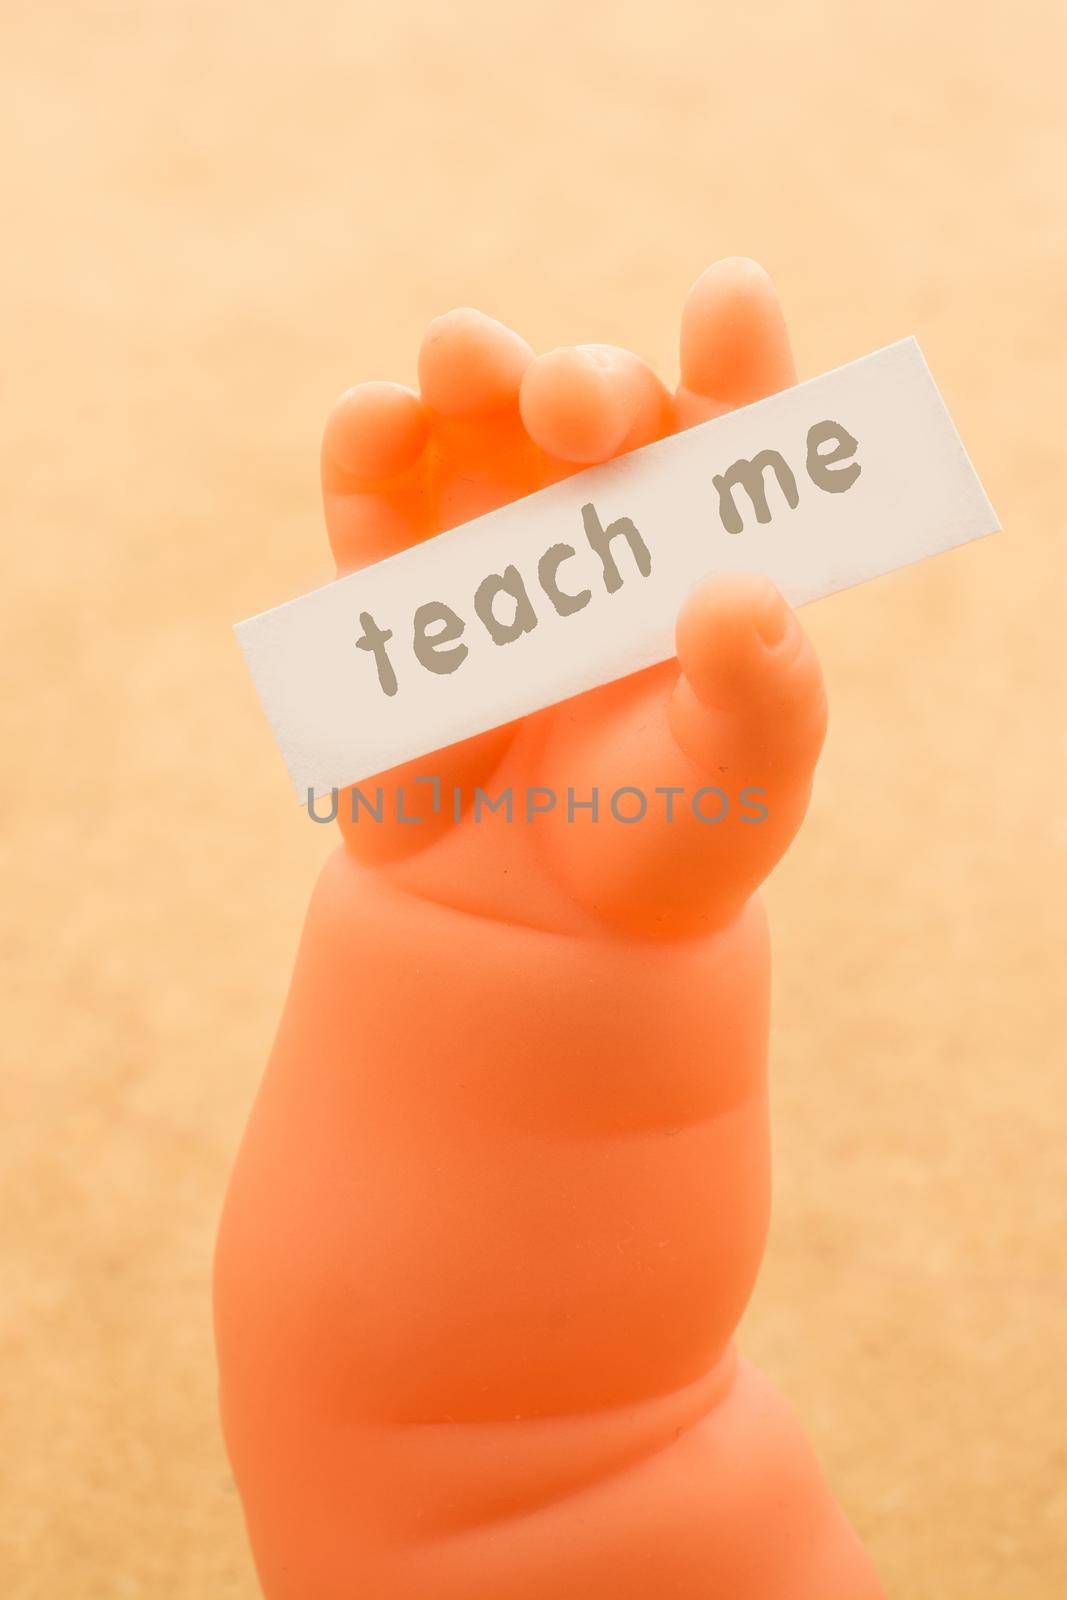 Toy doll hand holding paper with TEACH ME wording